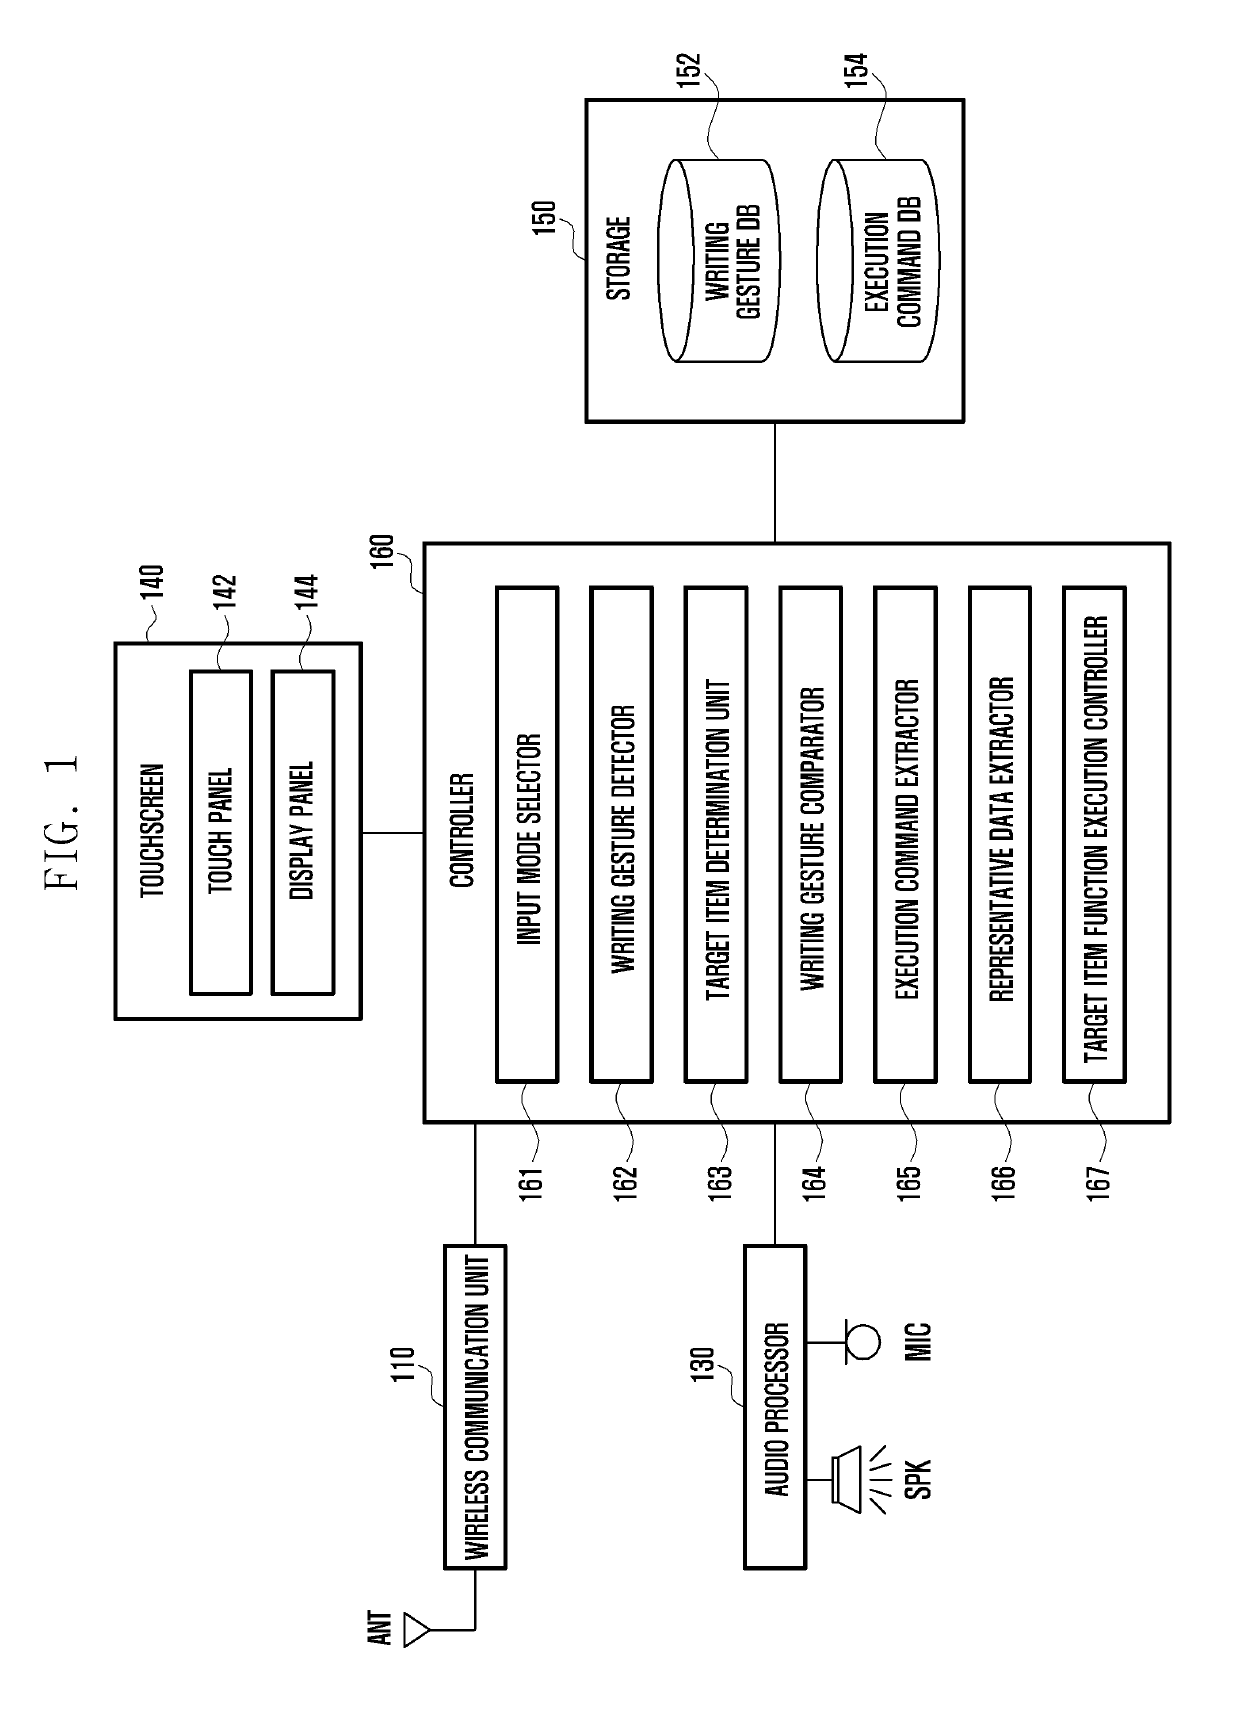 Method of controlling function execution in a mobile terminal by recognizing writing gesture and apparatus for performing the same